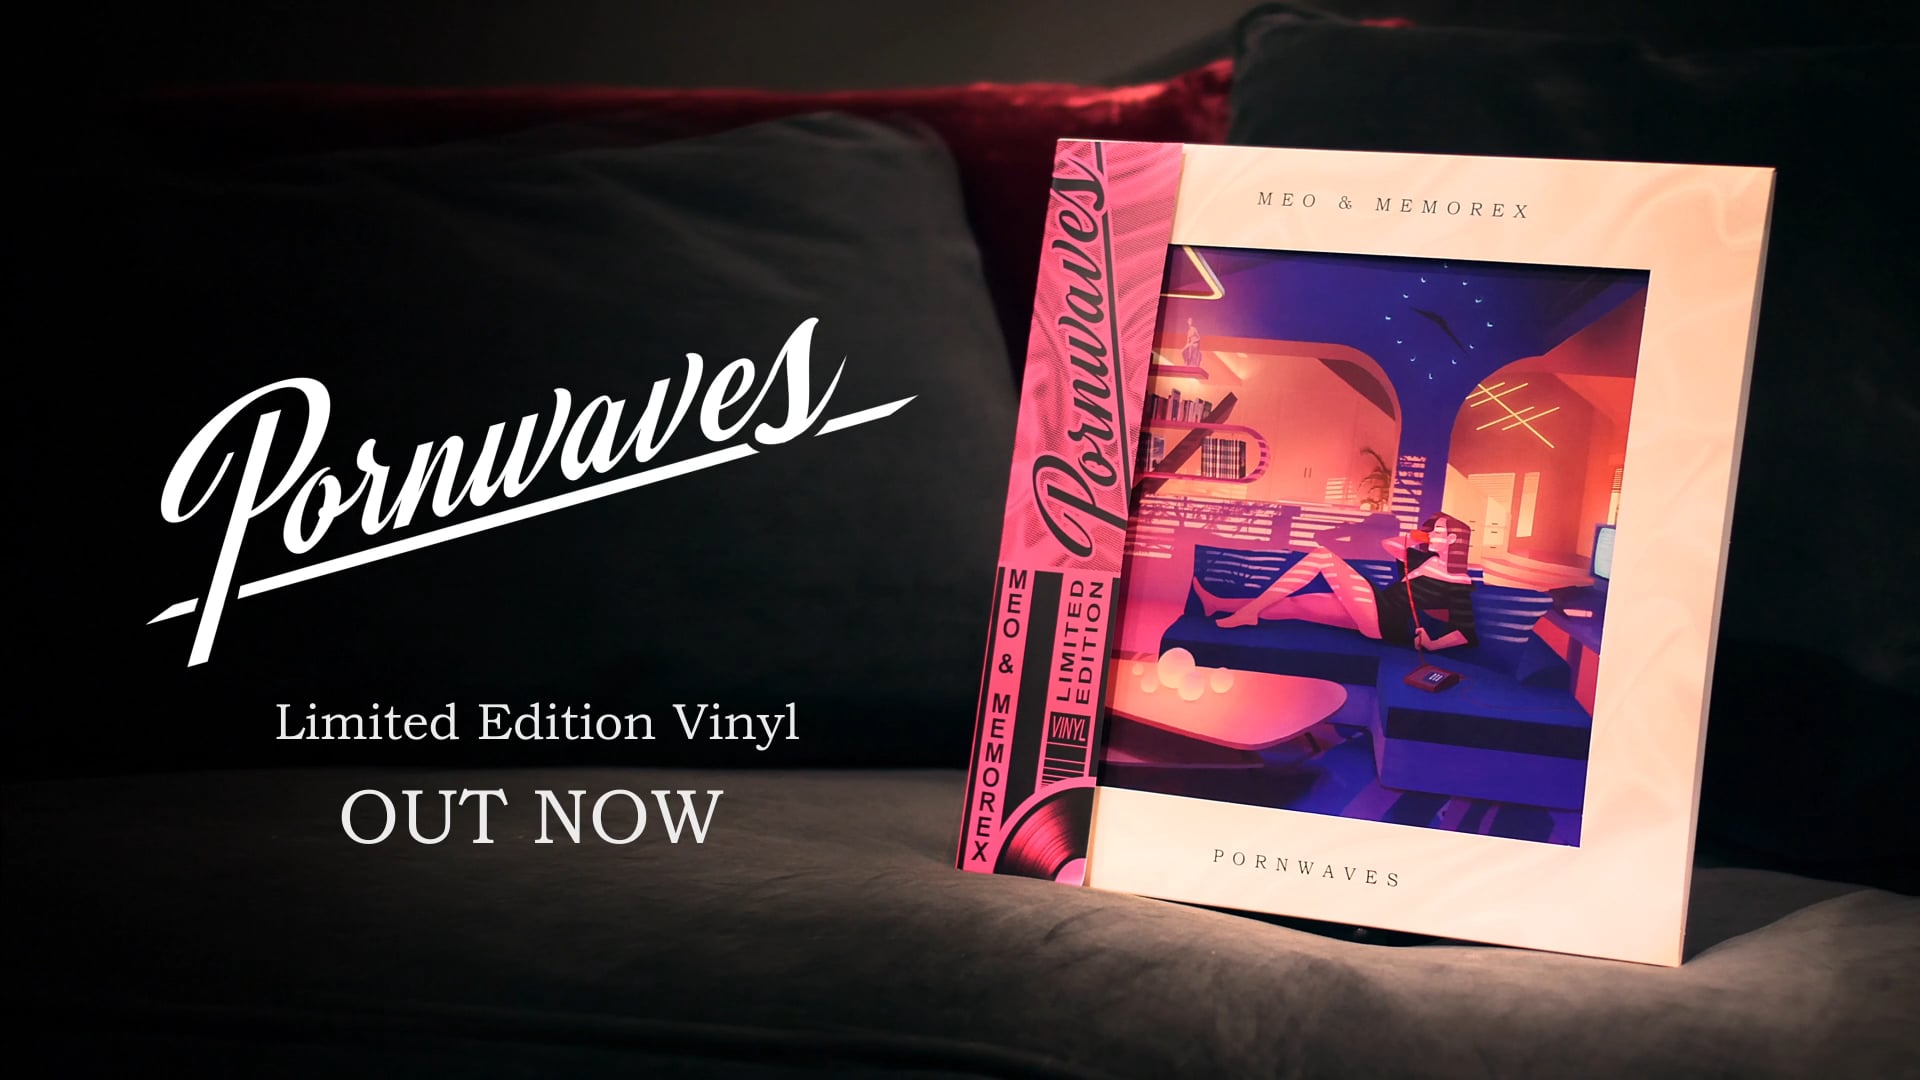 Pornwave Video - PORNWAVES - Limited Edition Vinyl (Release Video) on Vimeo